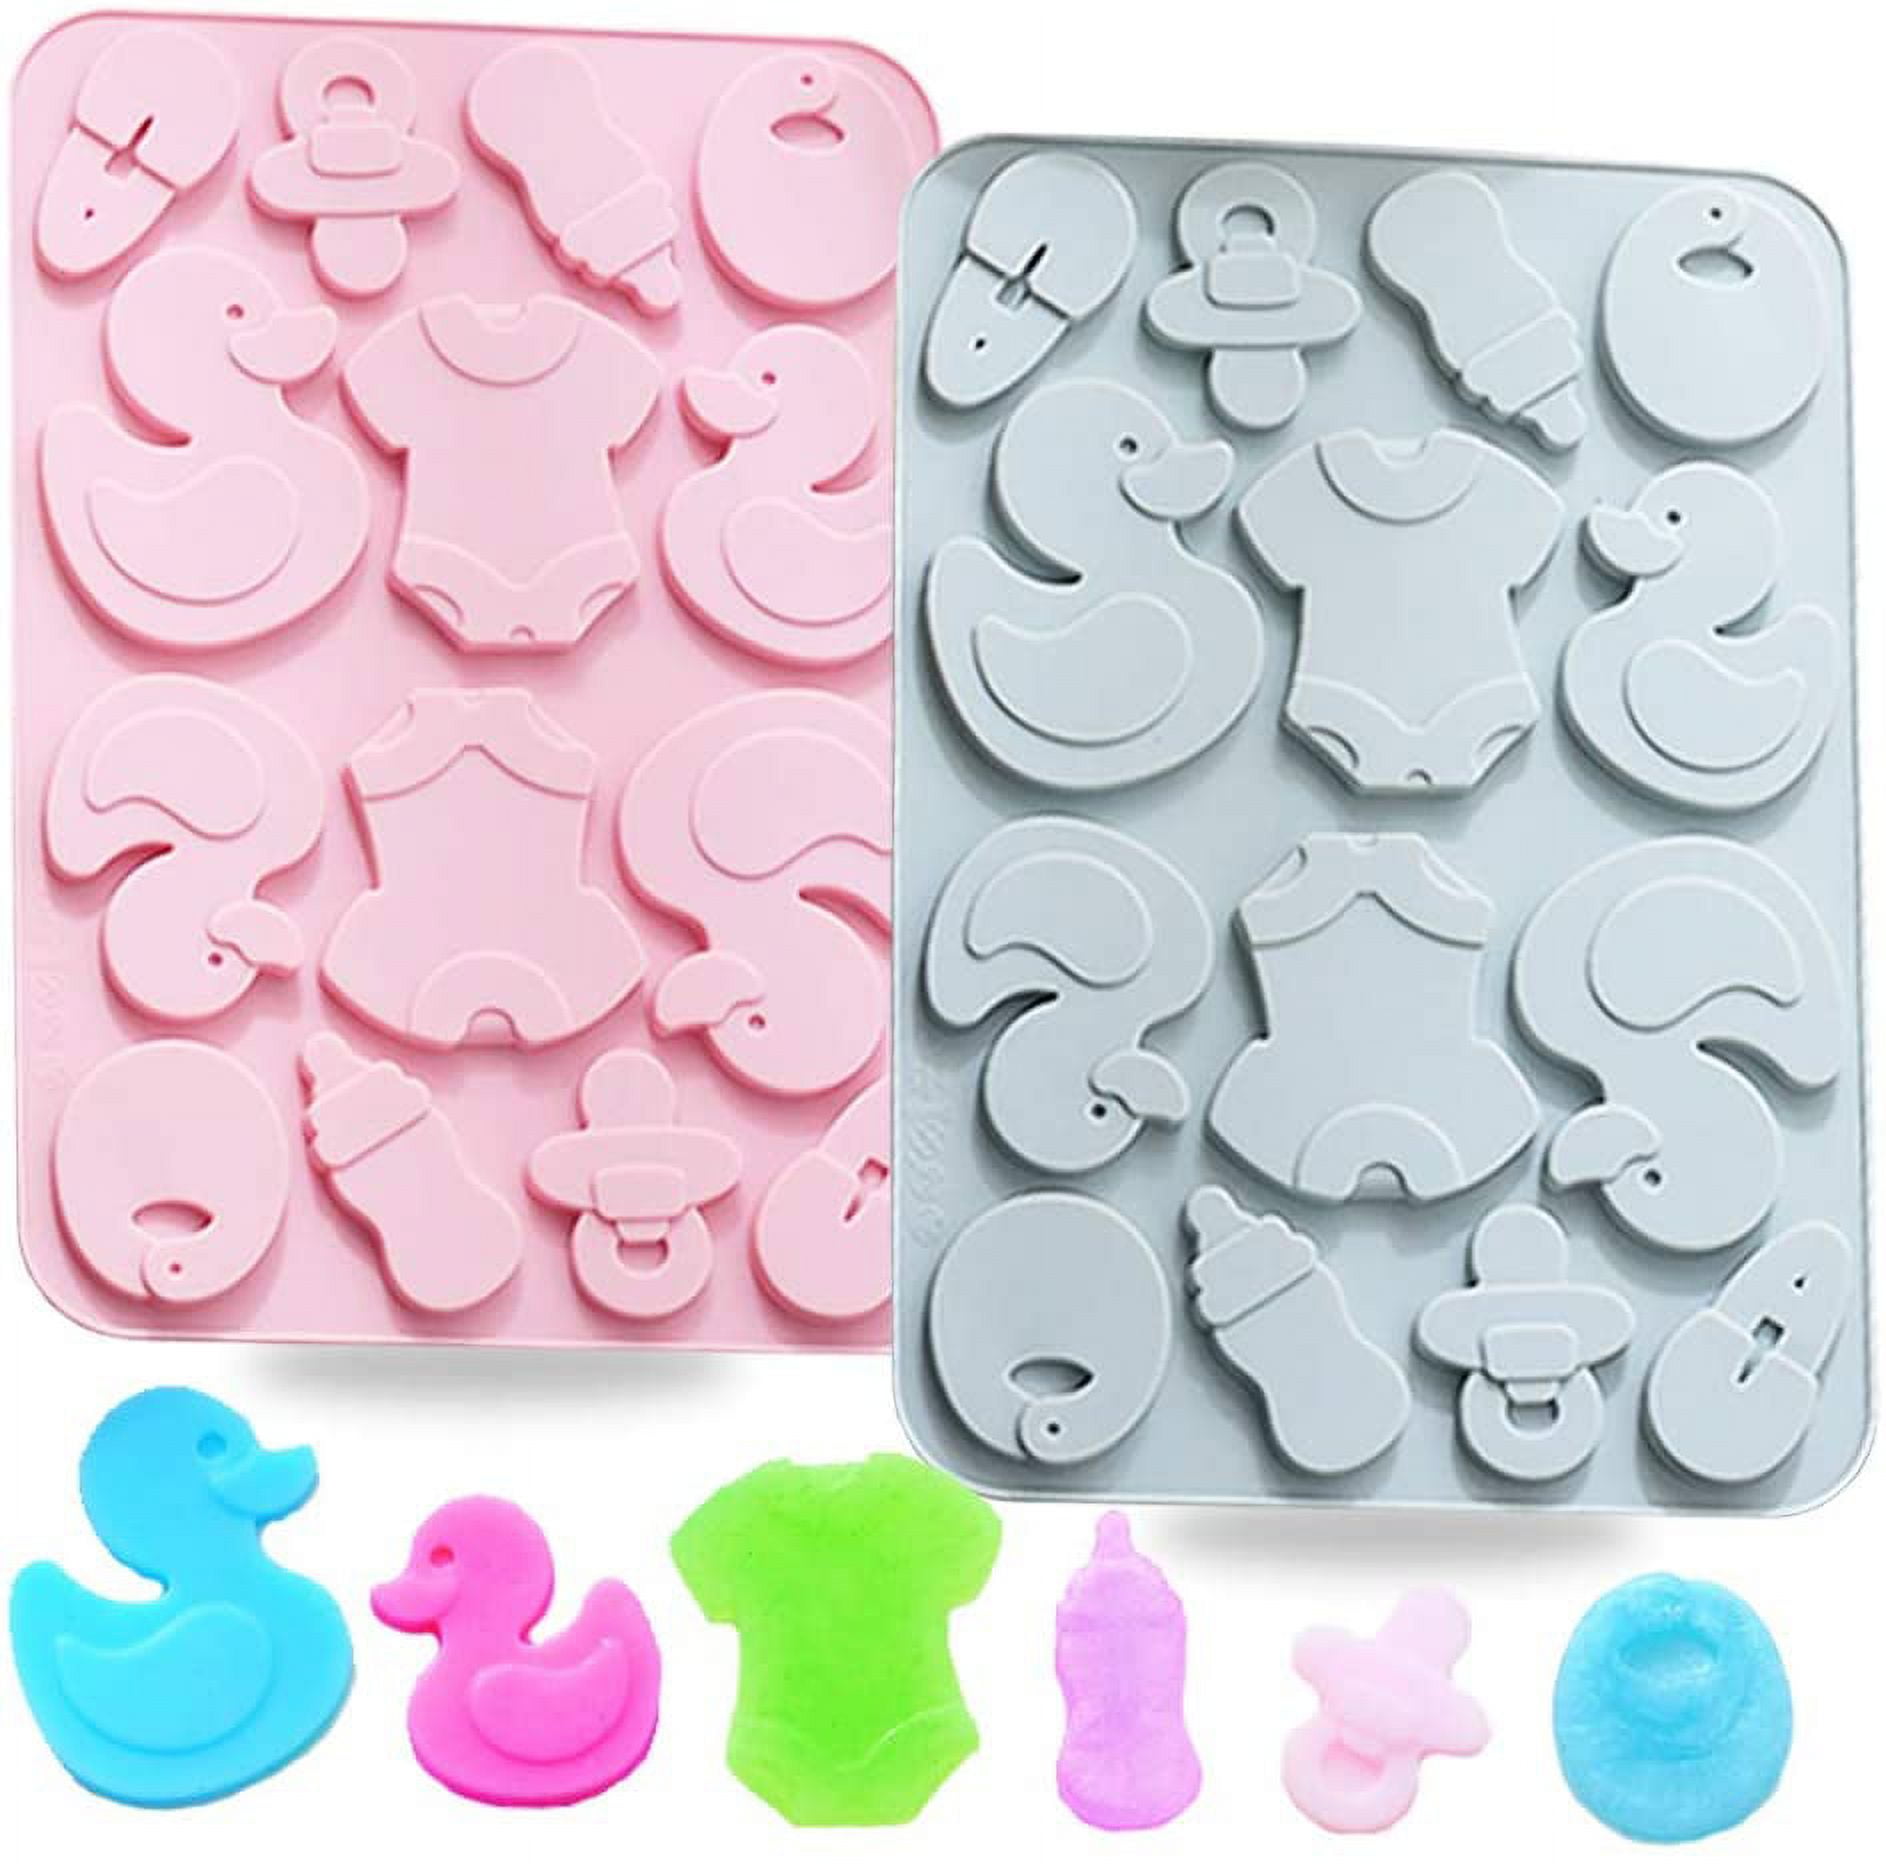 BABY SHOWER GENDER REVEAL SILICONE CAKE POP MOULD CHOCOLATE SWEET